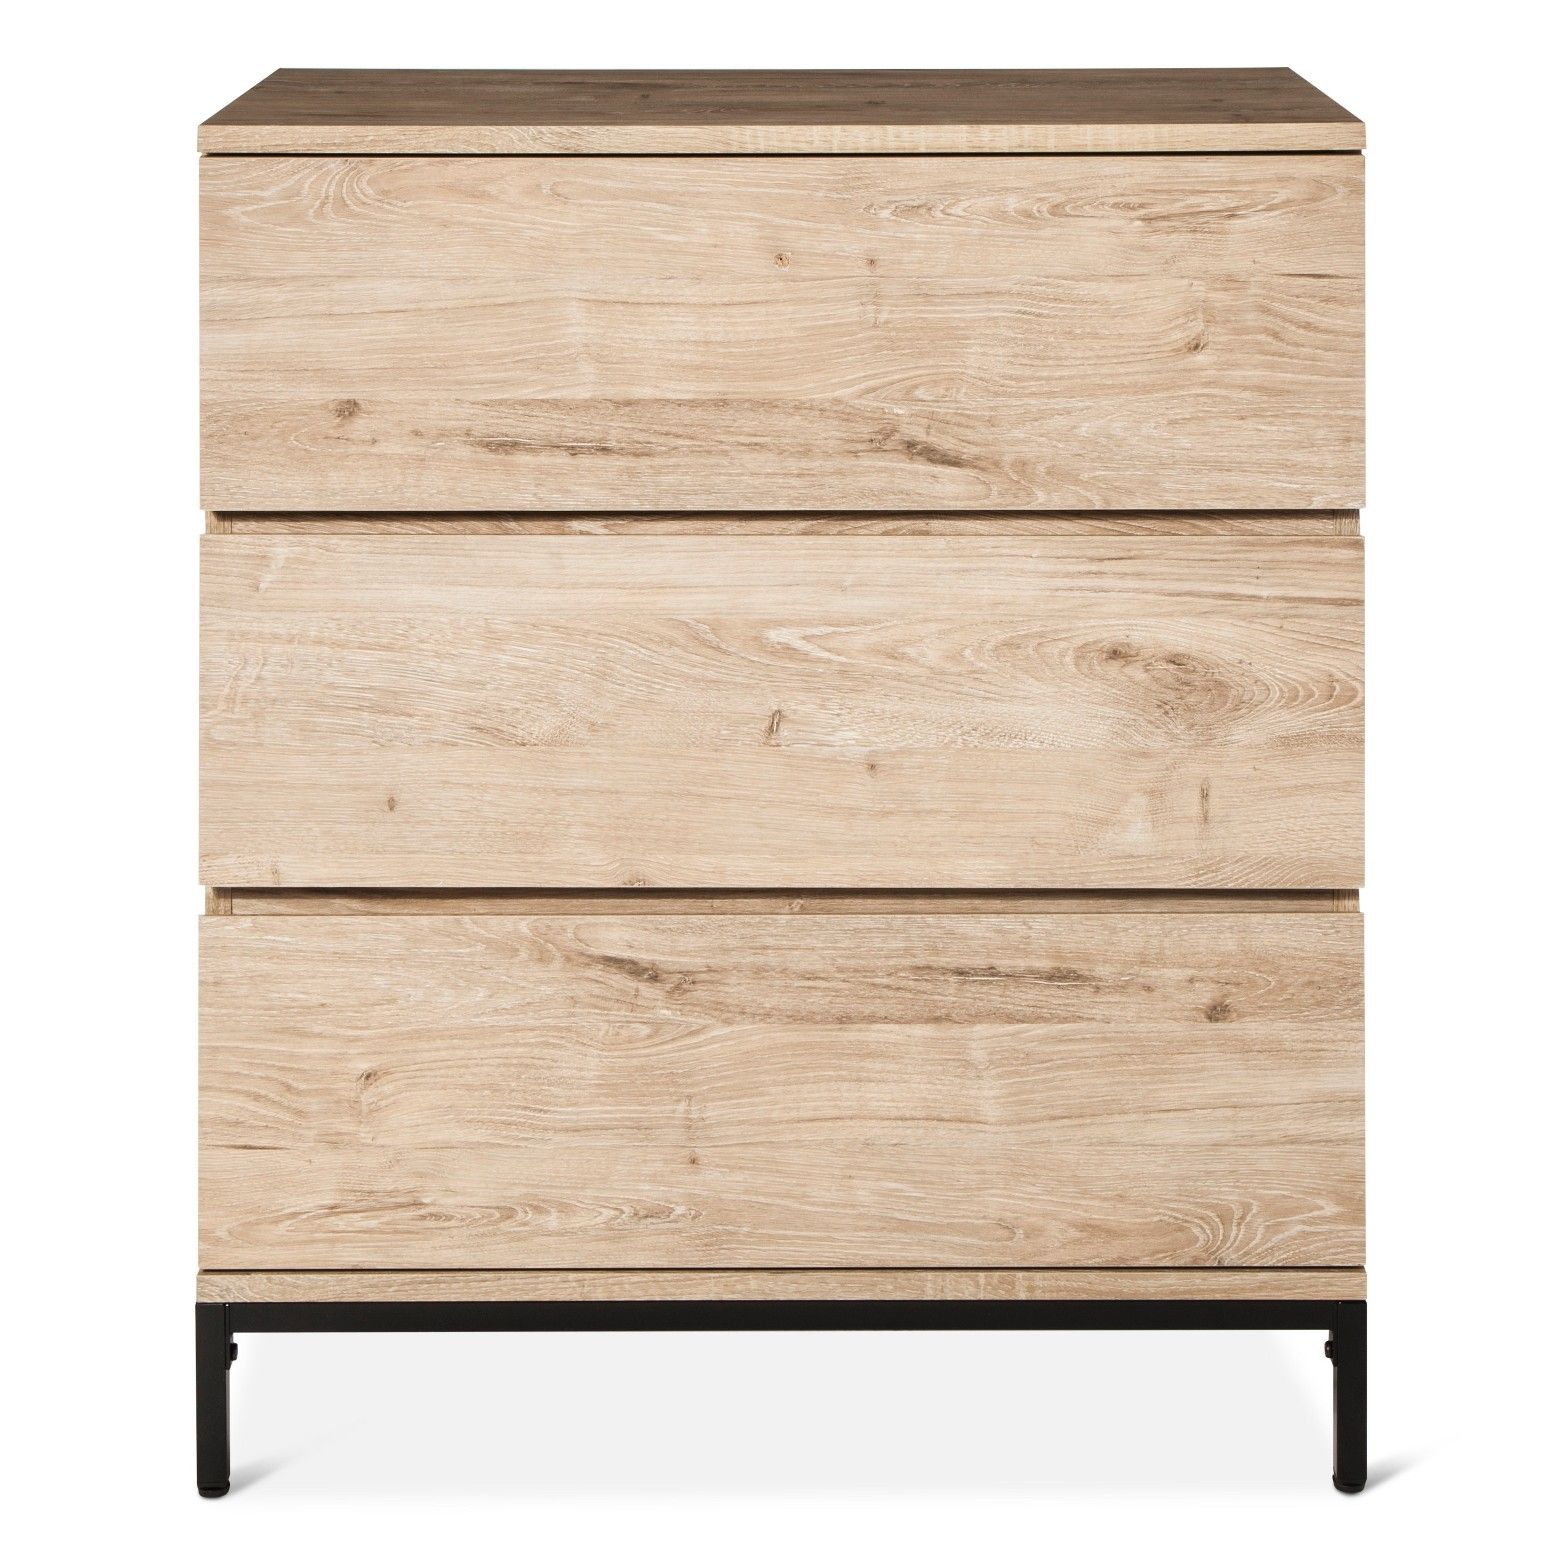 target for dressers amazing styles and finishes accent room essentials mixed material table any bedroom free shipping purchases over returns tall bedside drawers country